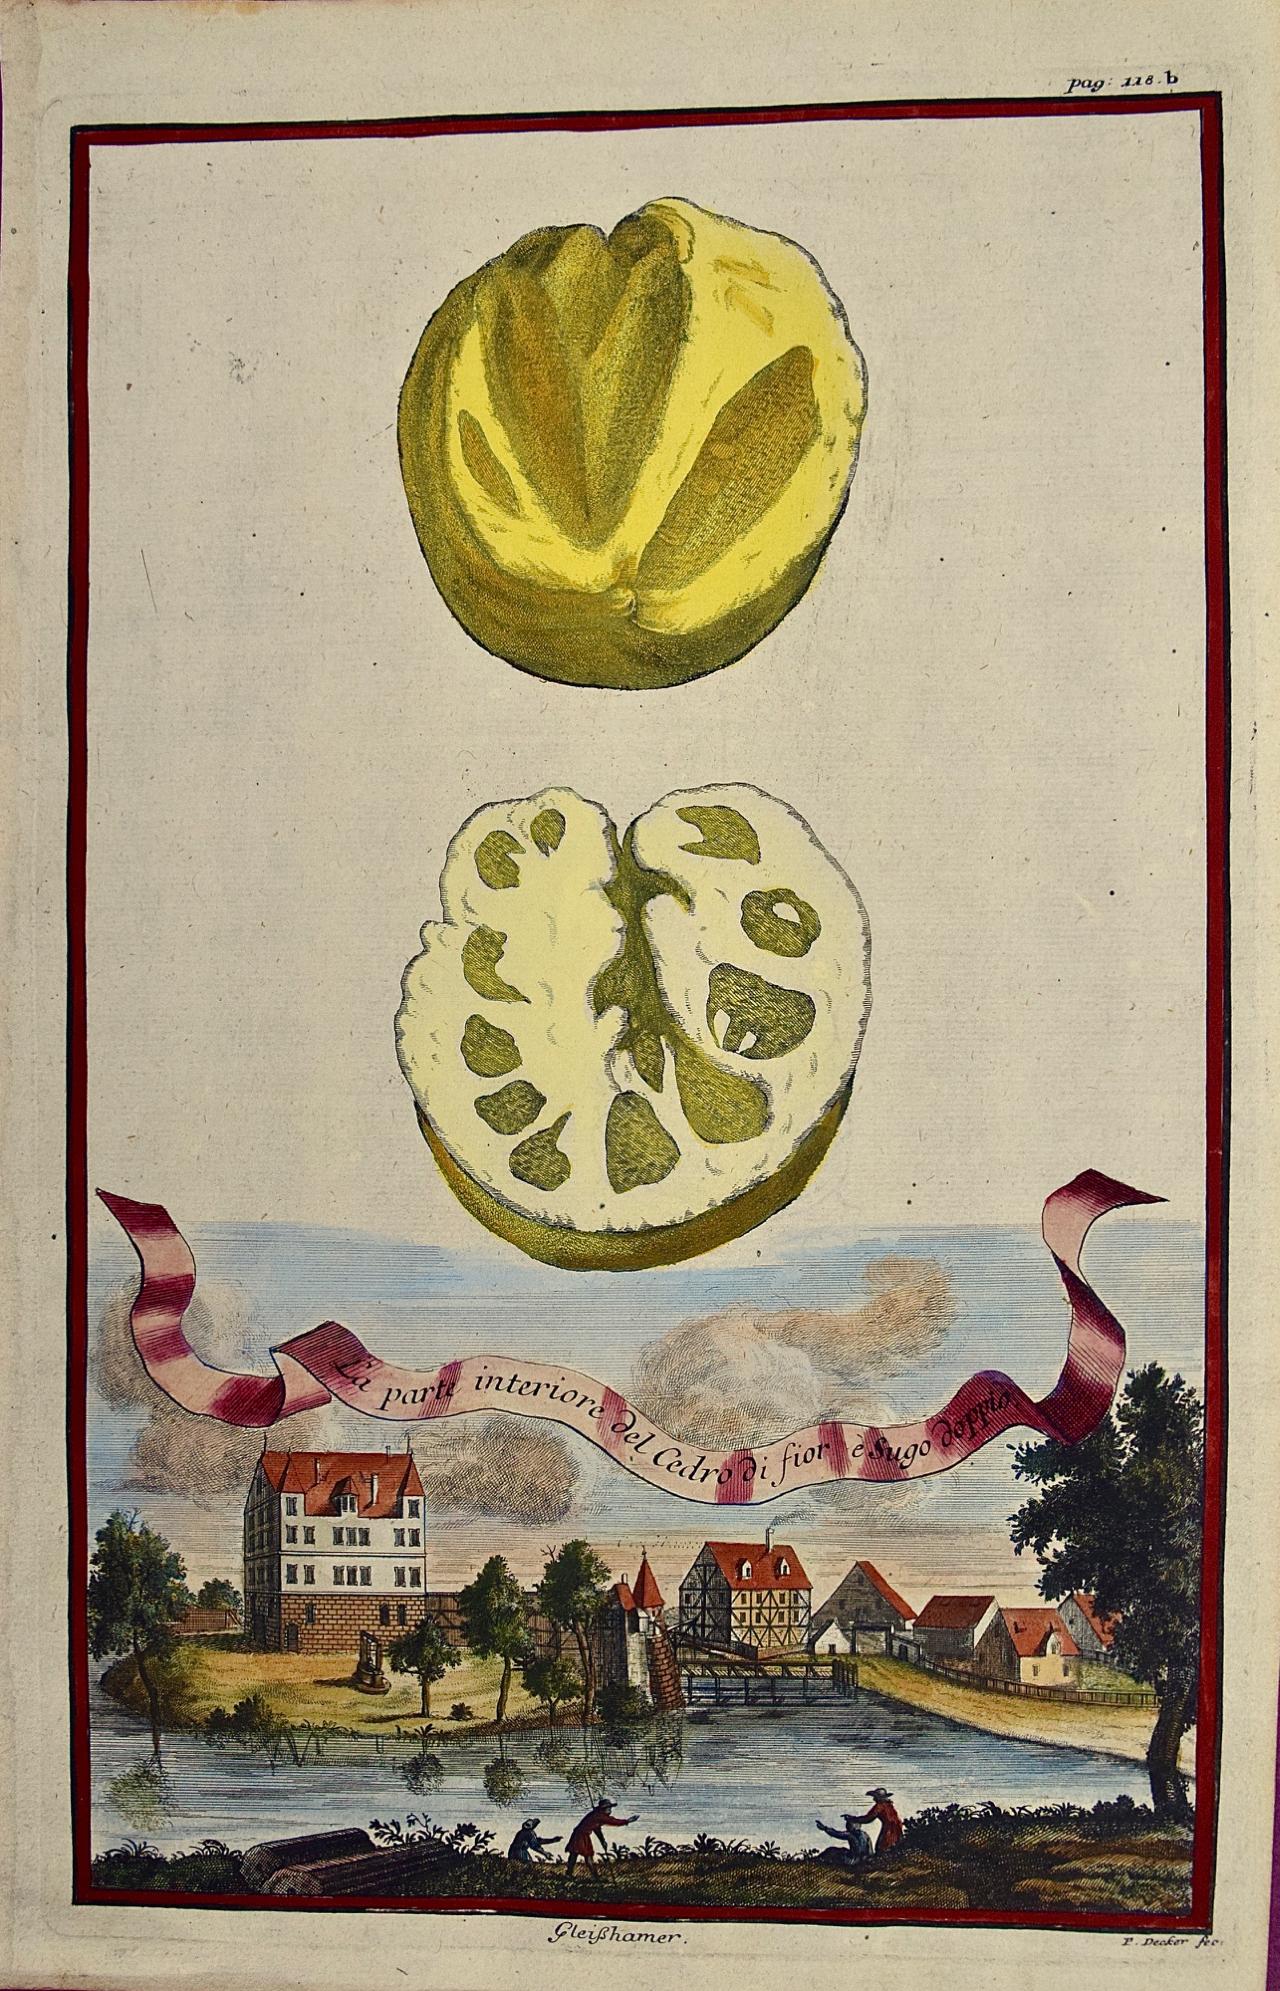 Lemons "La parte interiore": An Early 18th C. Volckamer Hand-colored Engraving